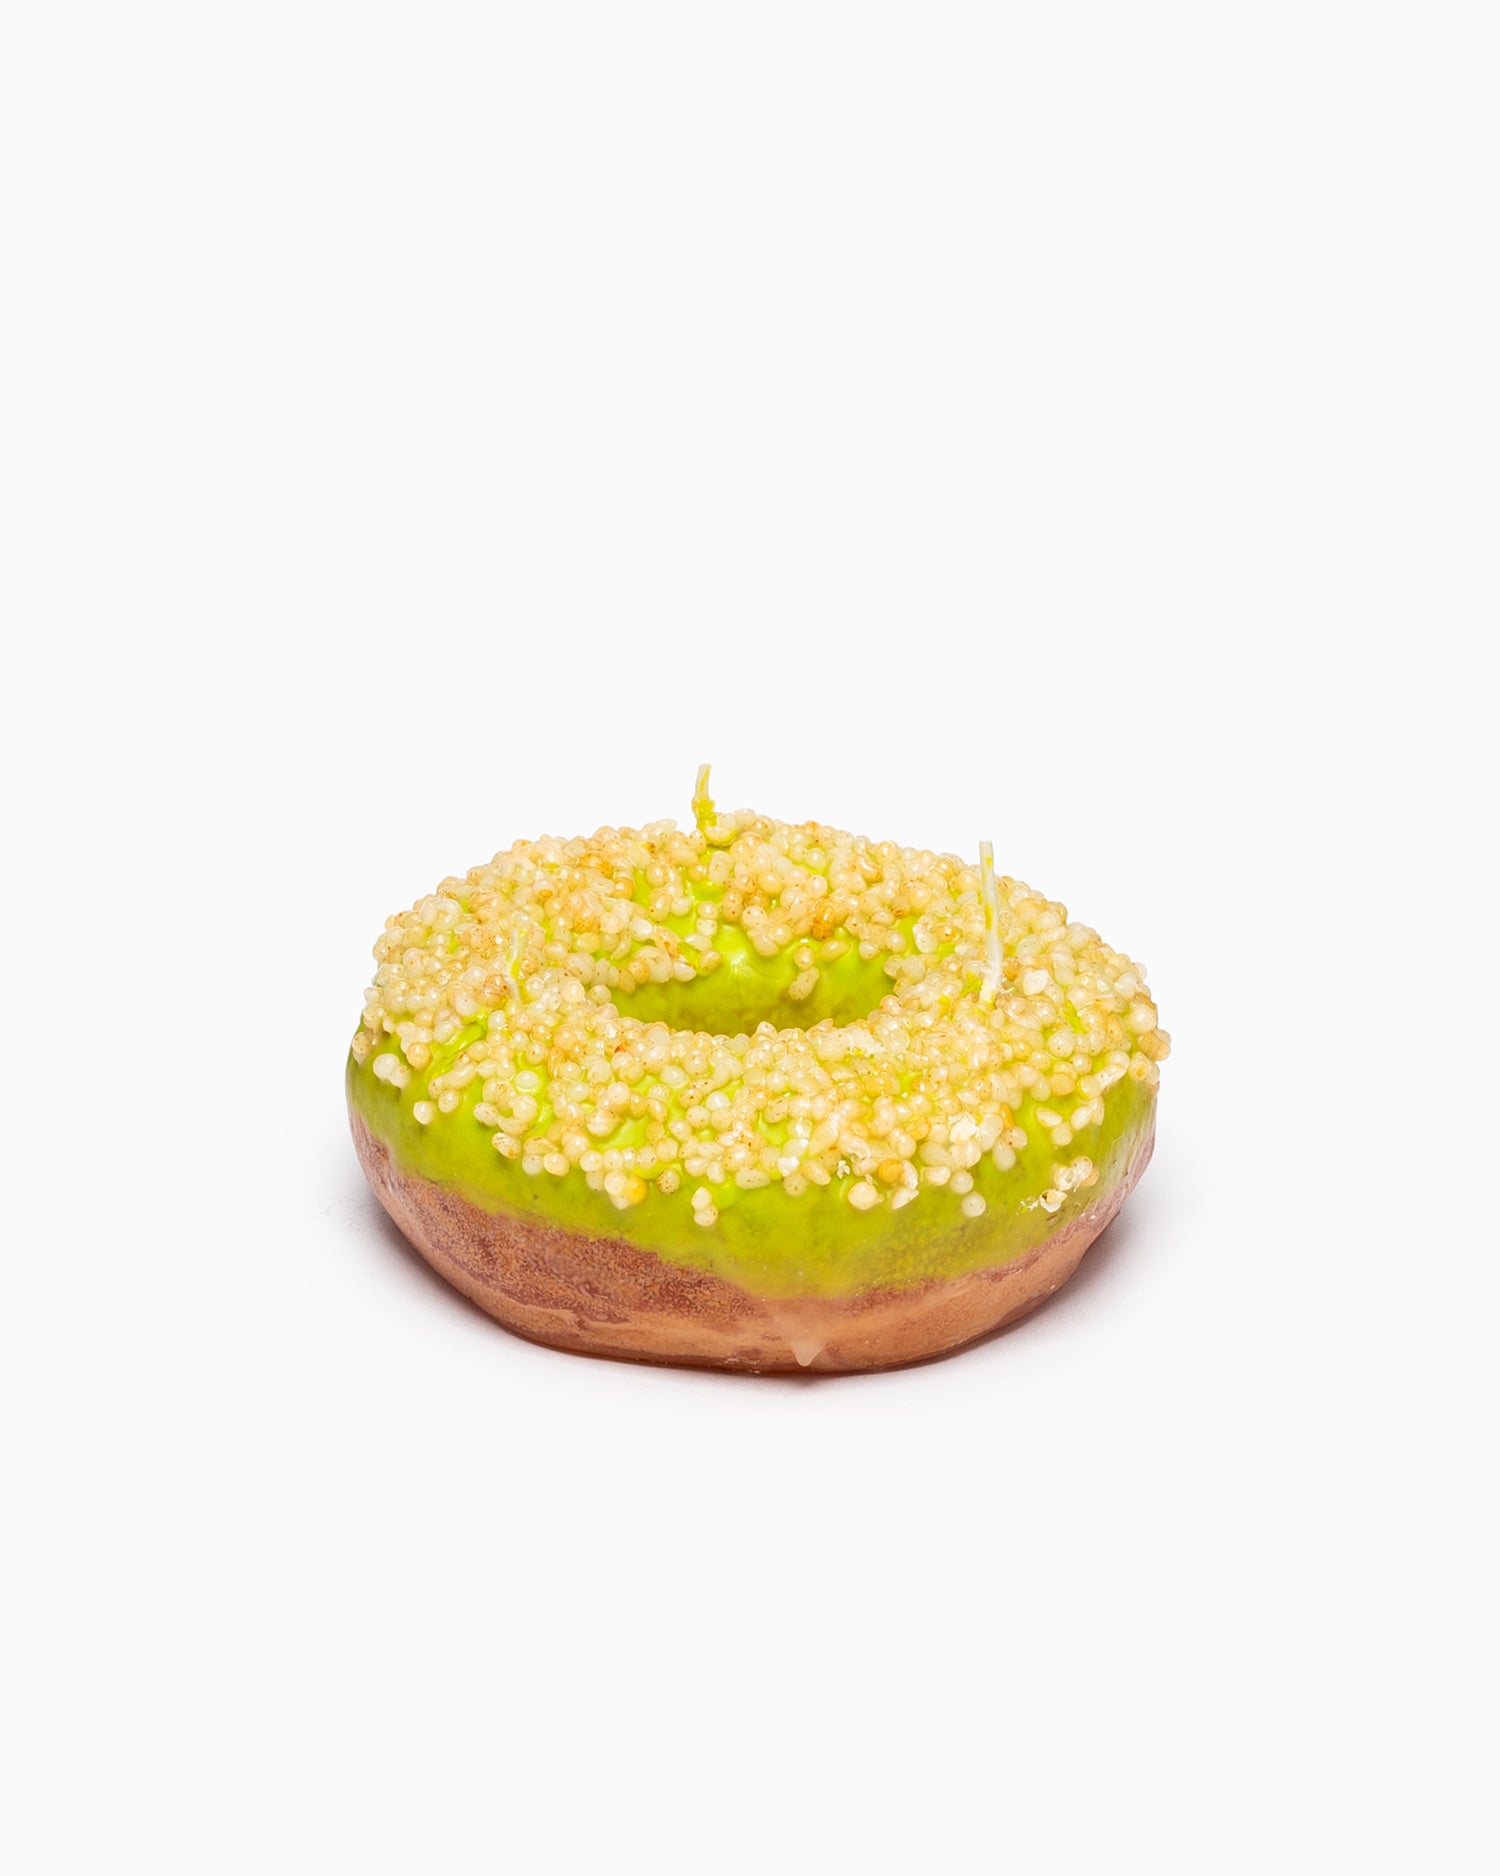 Donut Candle - Pistachio Glazed with Yellow Sprinkles